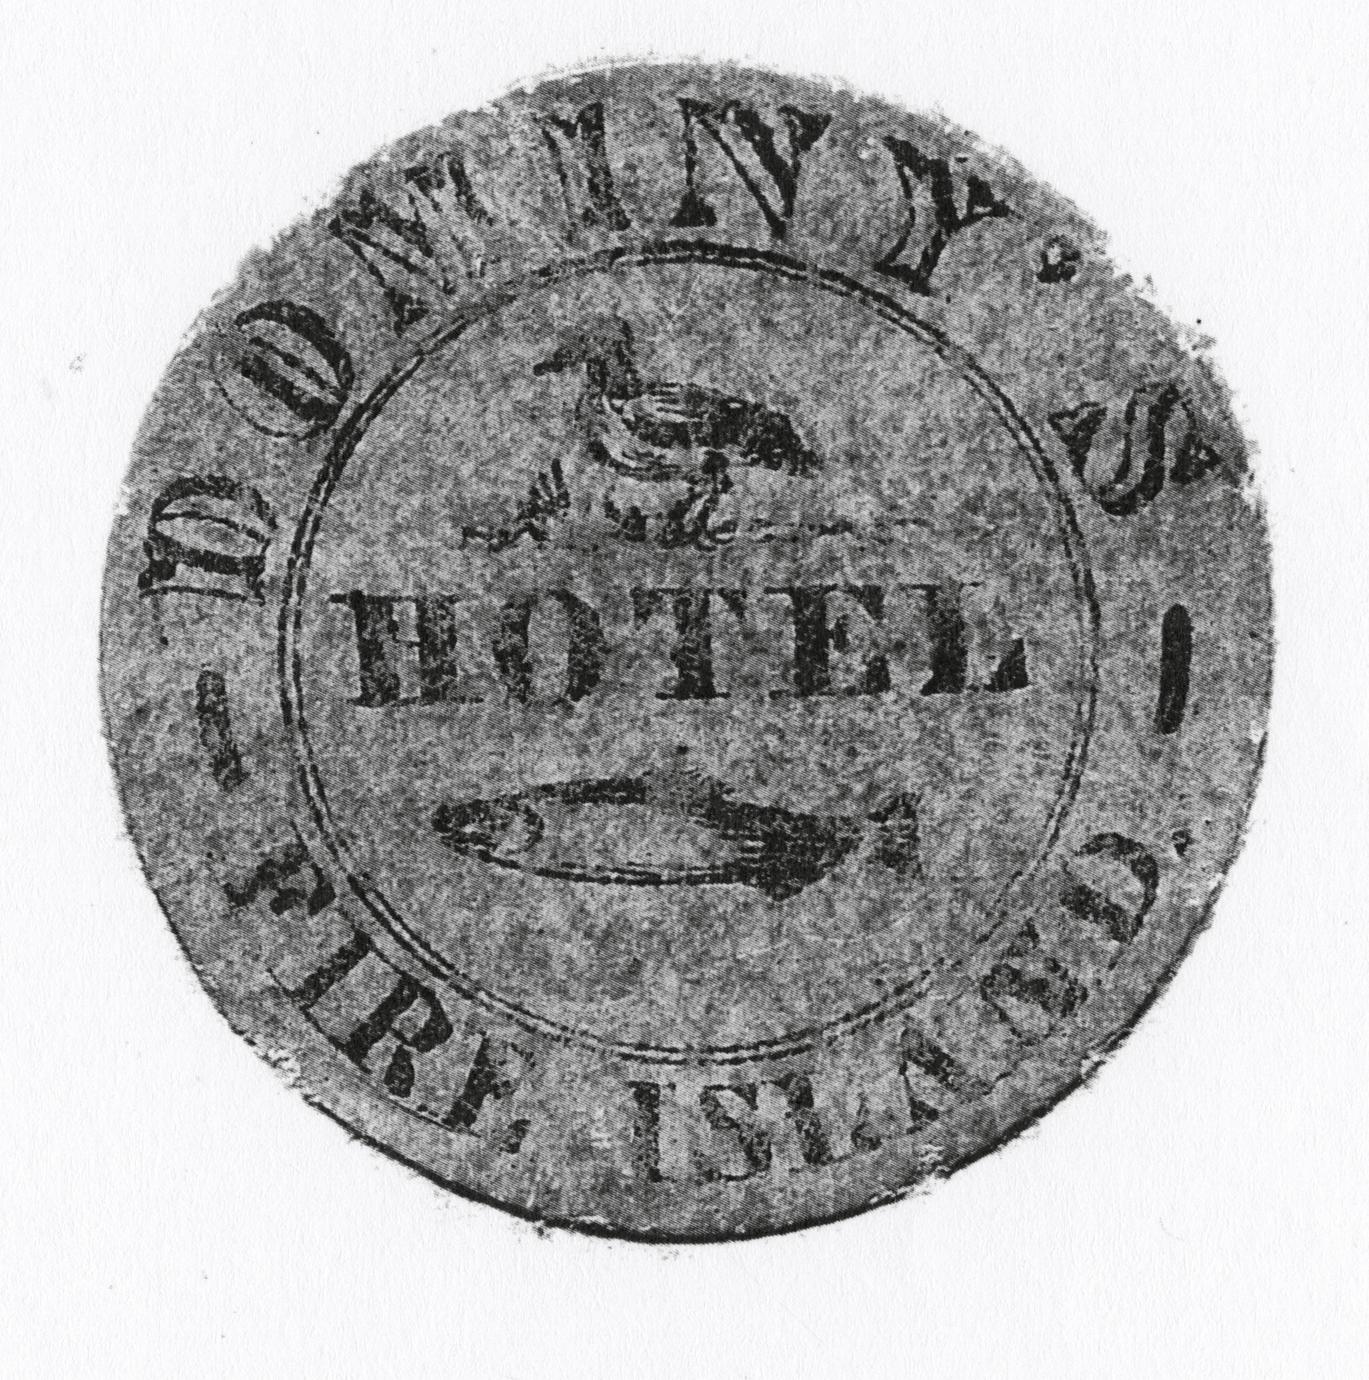 Black and white photograph of a letter seal used by Felix Dominy to advertise Dominy's Hotel.